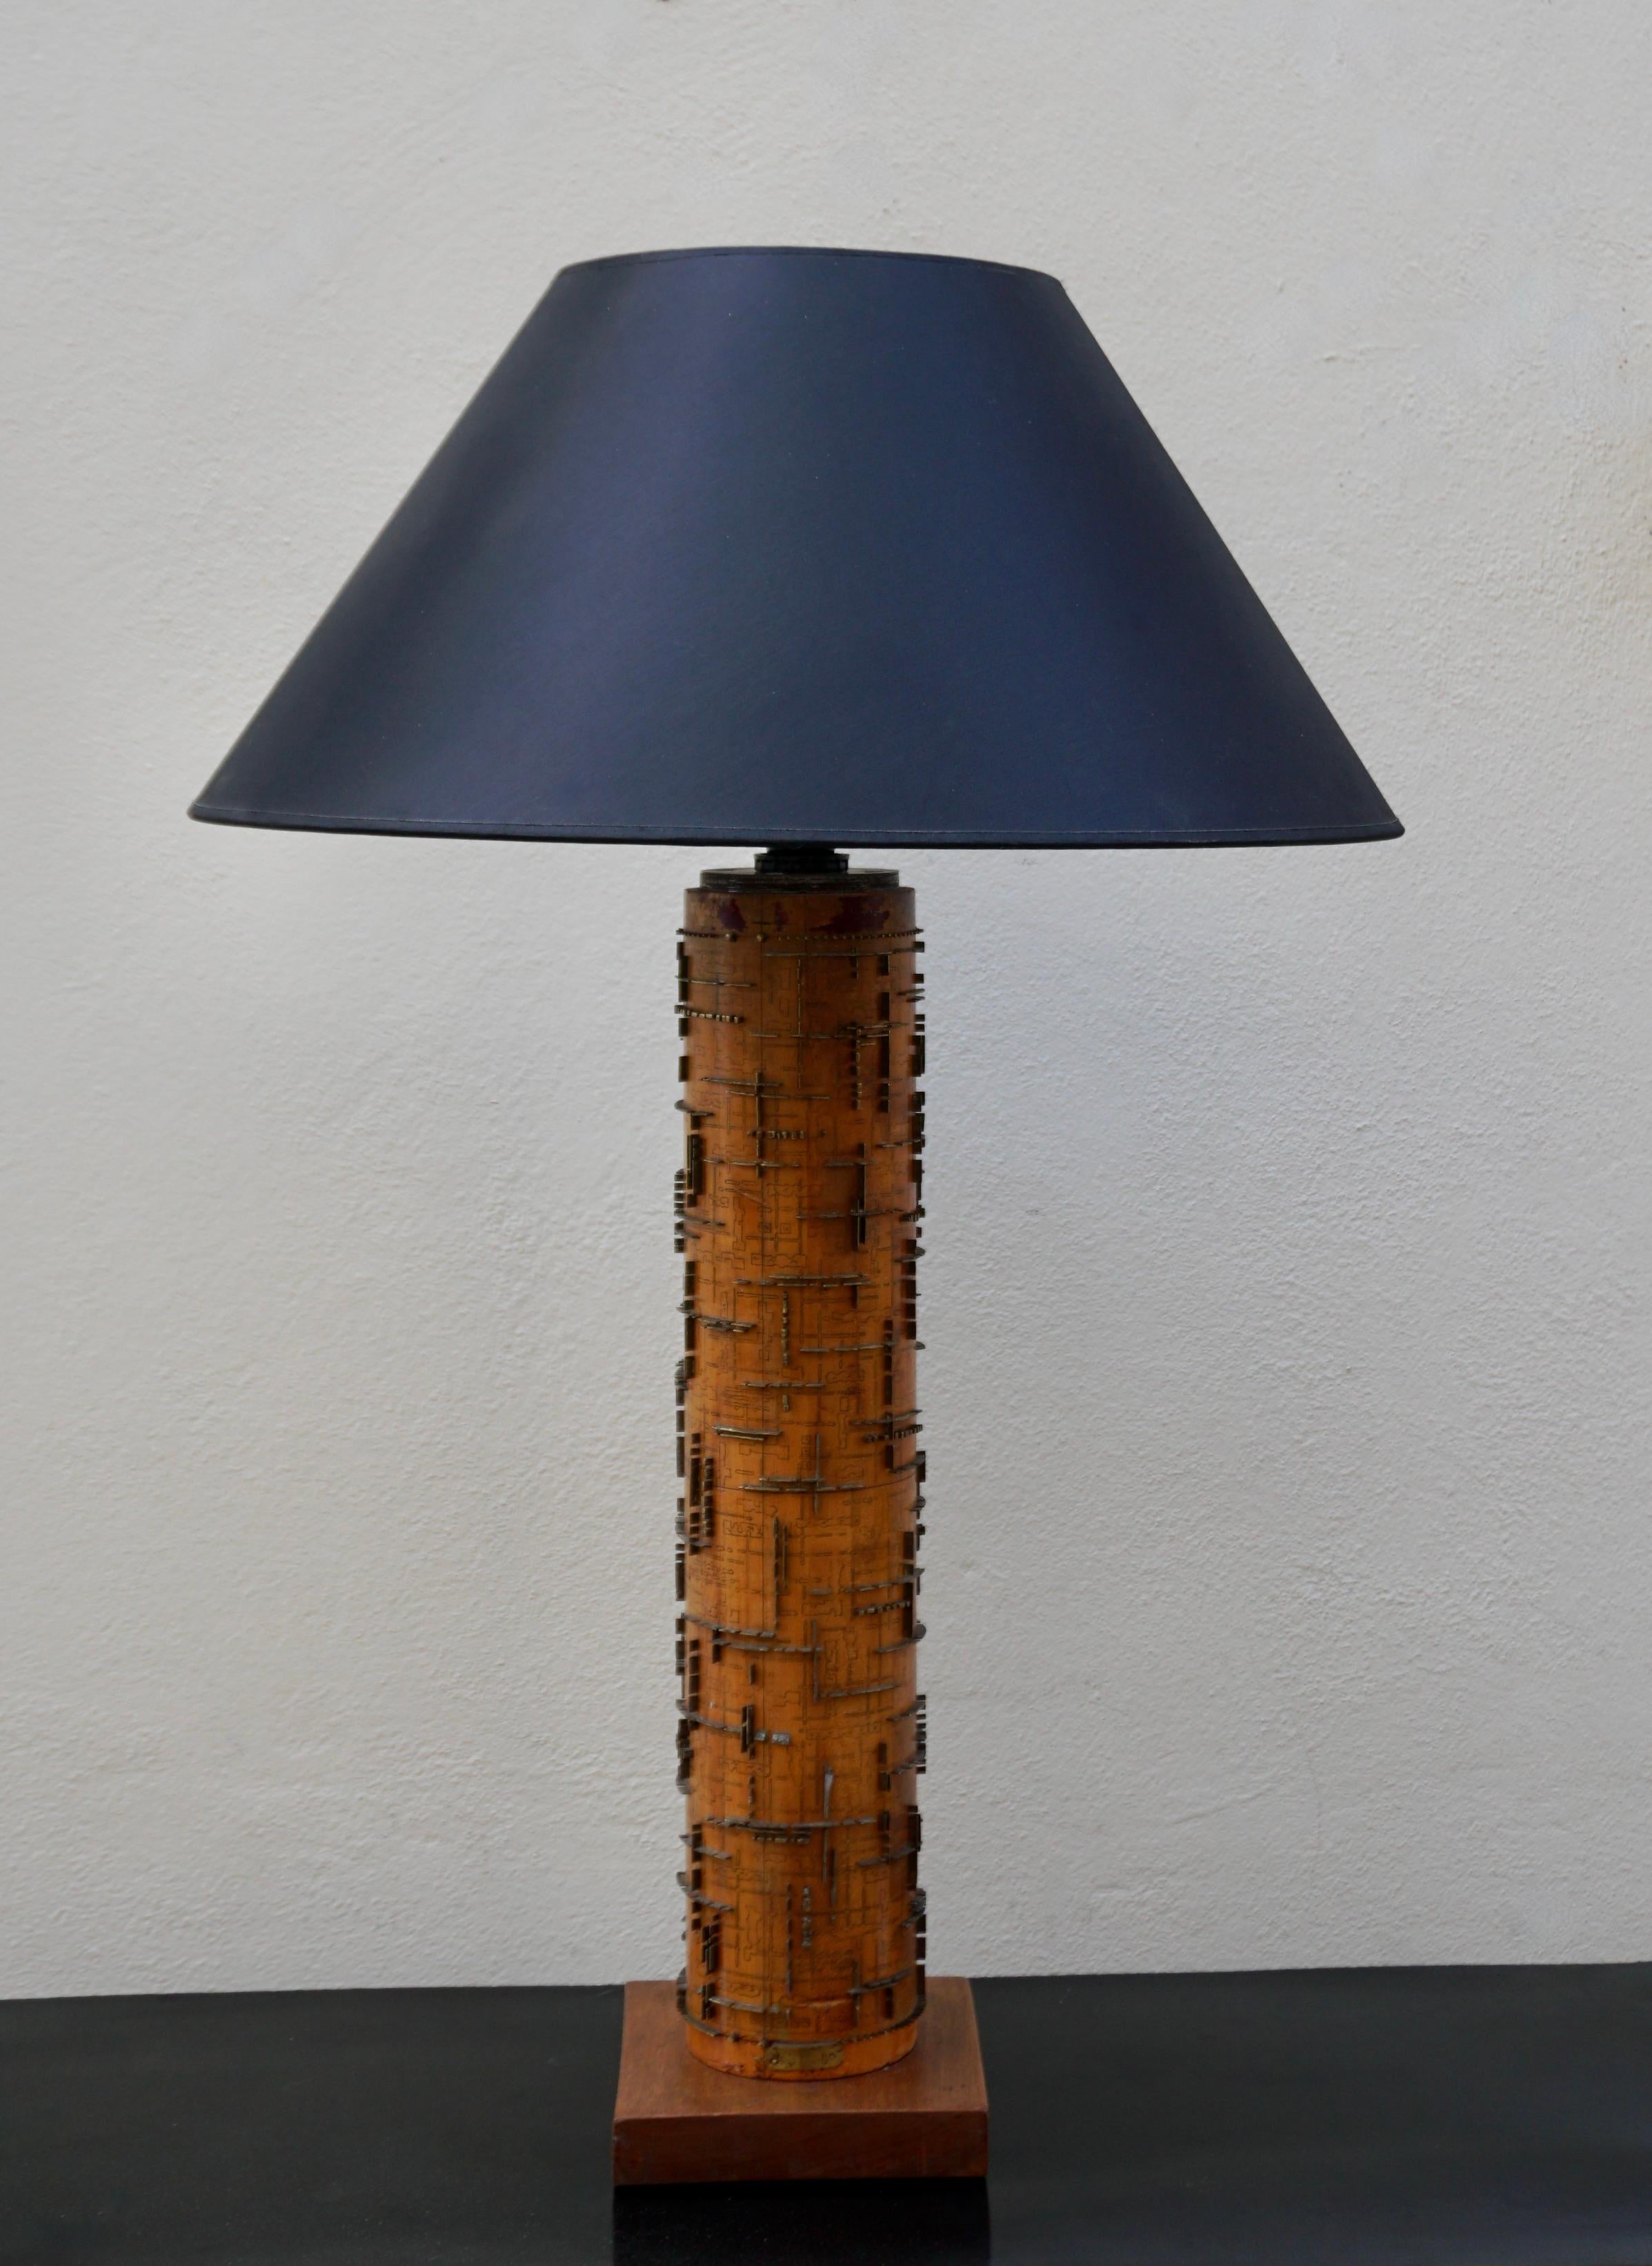 A stunning large-scale vintage wallpaper roller as lamp. Dating from the 1890s, this industrial fabric or wallpaper roller has been up cycled at some point in time into a table lamp. The roller itself is clearly identified as being made in Belgium